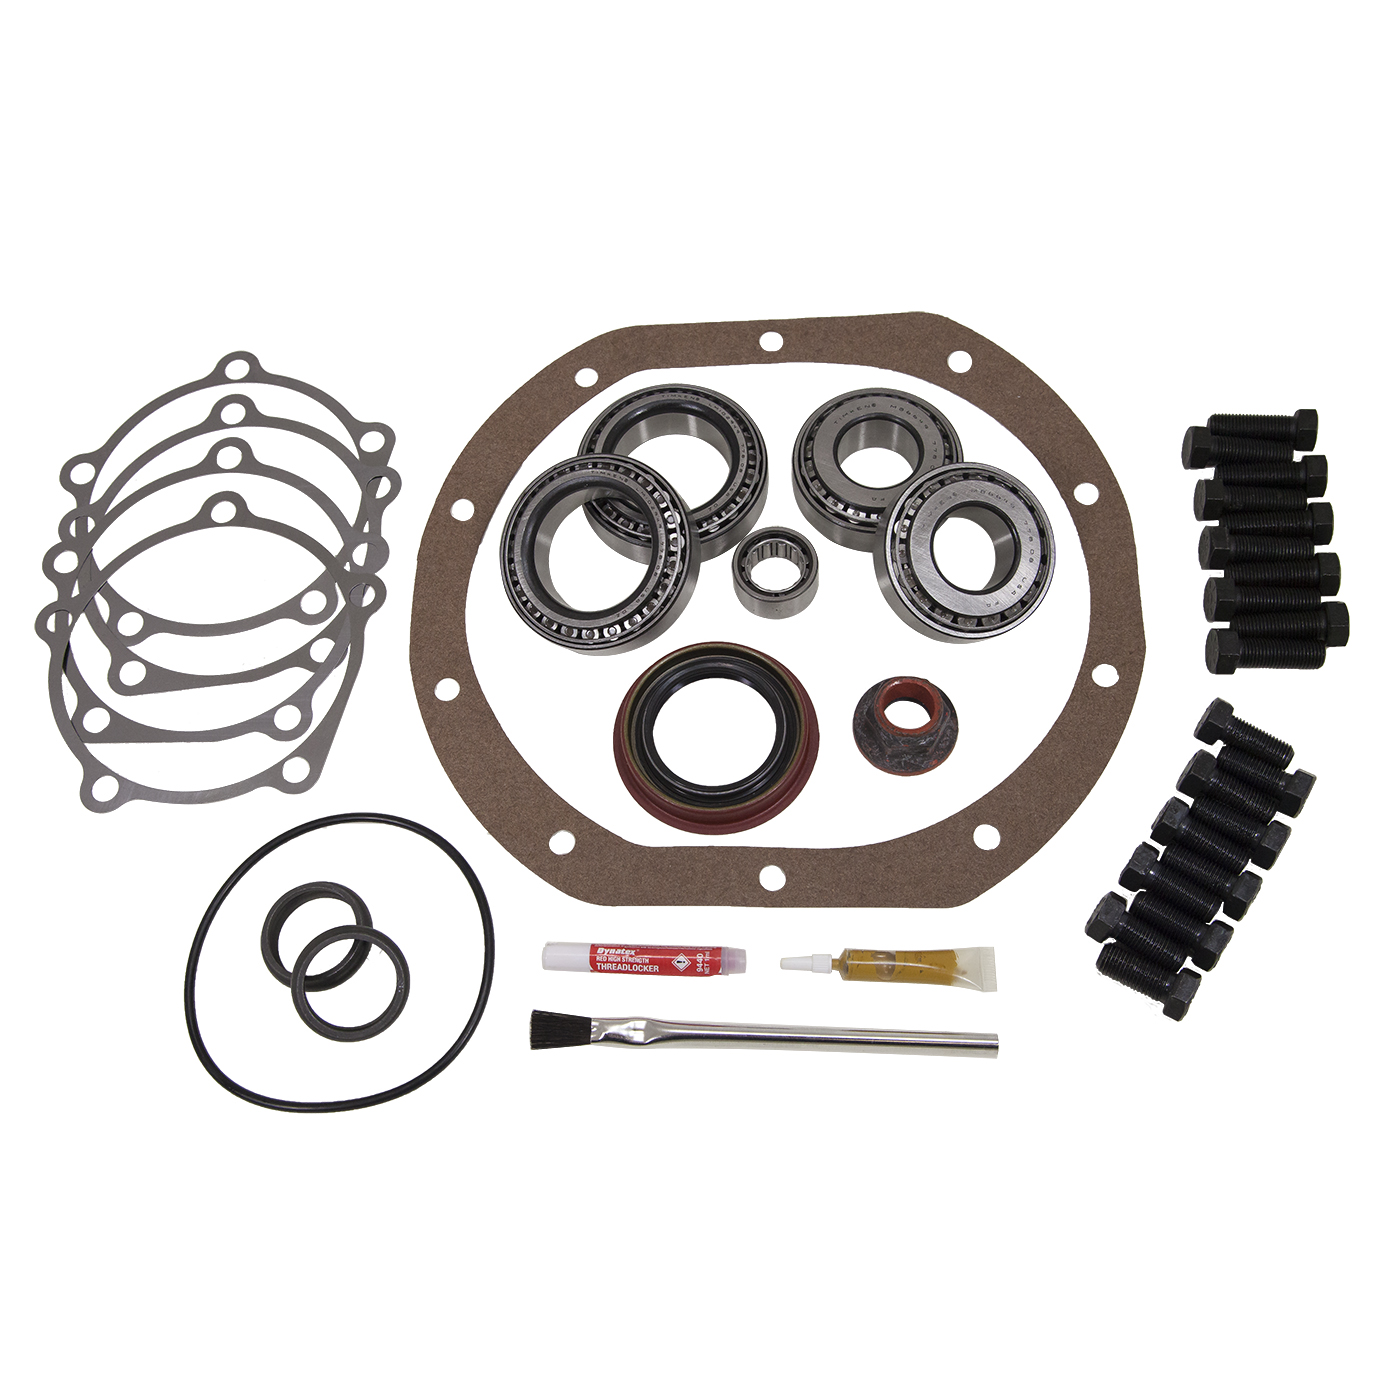 USA Standard ZK F8-AG Master Overhaul Kit, For The Ford 8 in. Differential W/ Hd Posi